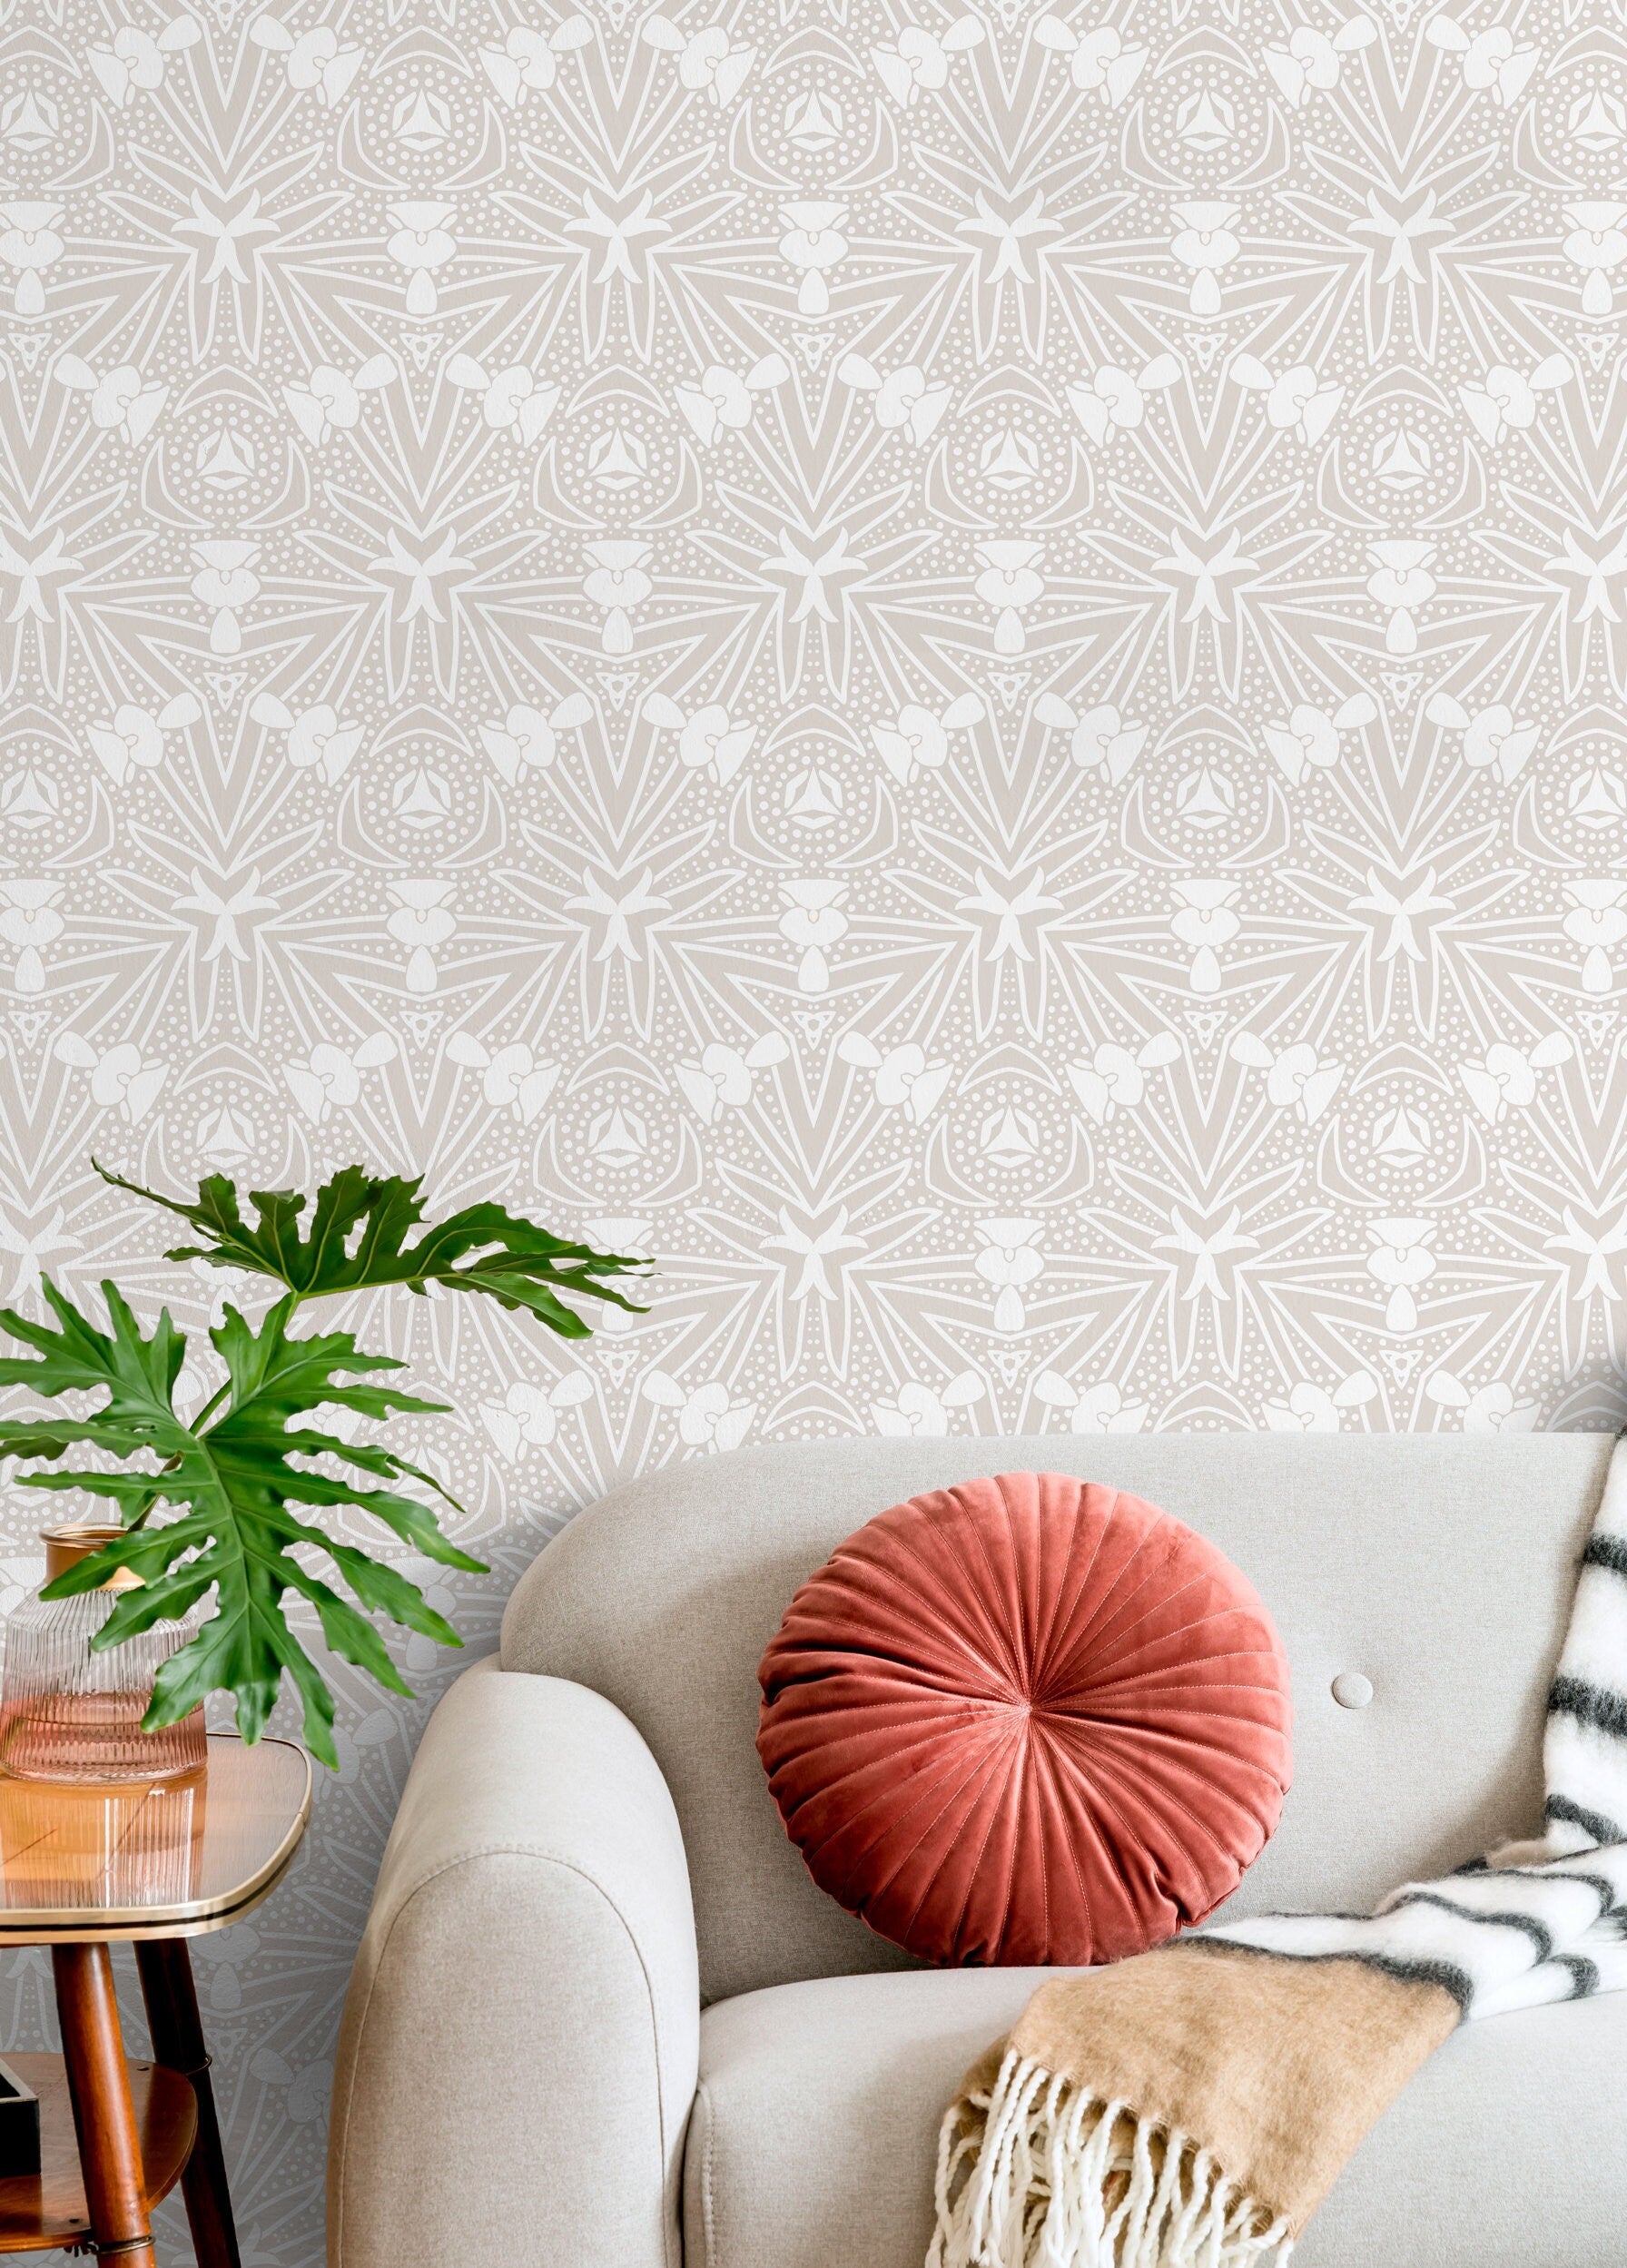 Wallpaper Removable Wallpaper Peel and Stick Wallpaper Wall Decor Home Decor Wall Art Printable Wall Art Room Decor Wall Prints - X020